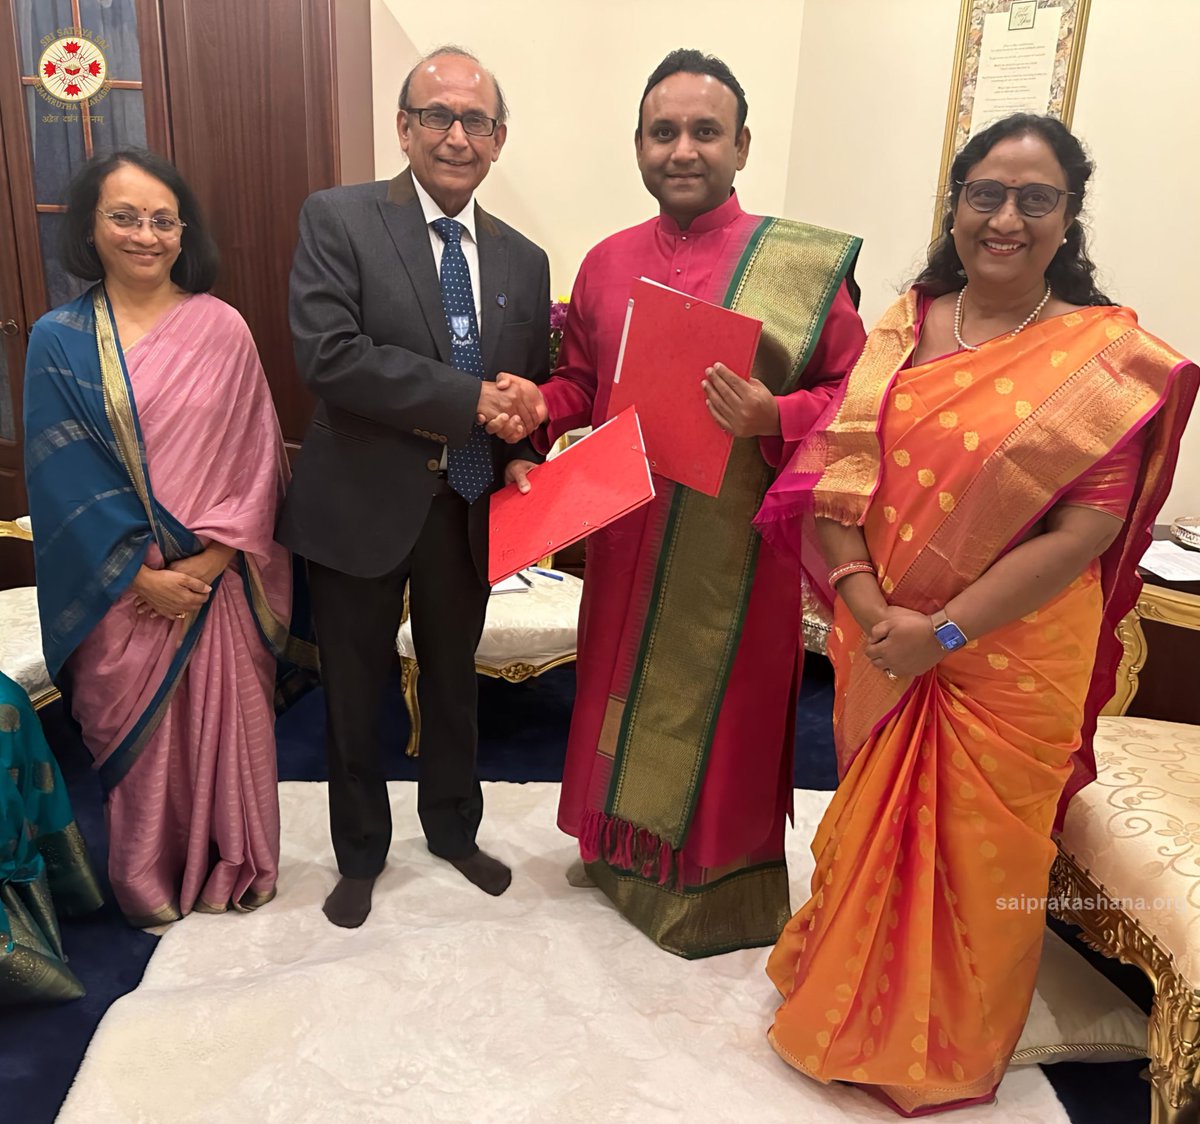 Fostering global collaboration in healthcare! The Sri Madhusudan Sai Institute of Medical Sciences and Research (SMSIMSR) and the British Association of Physicians of Indian Origin (@BAPIOUK) joined forces through a new Memorandum of Understanding. This partnership paves the way